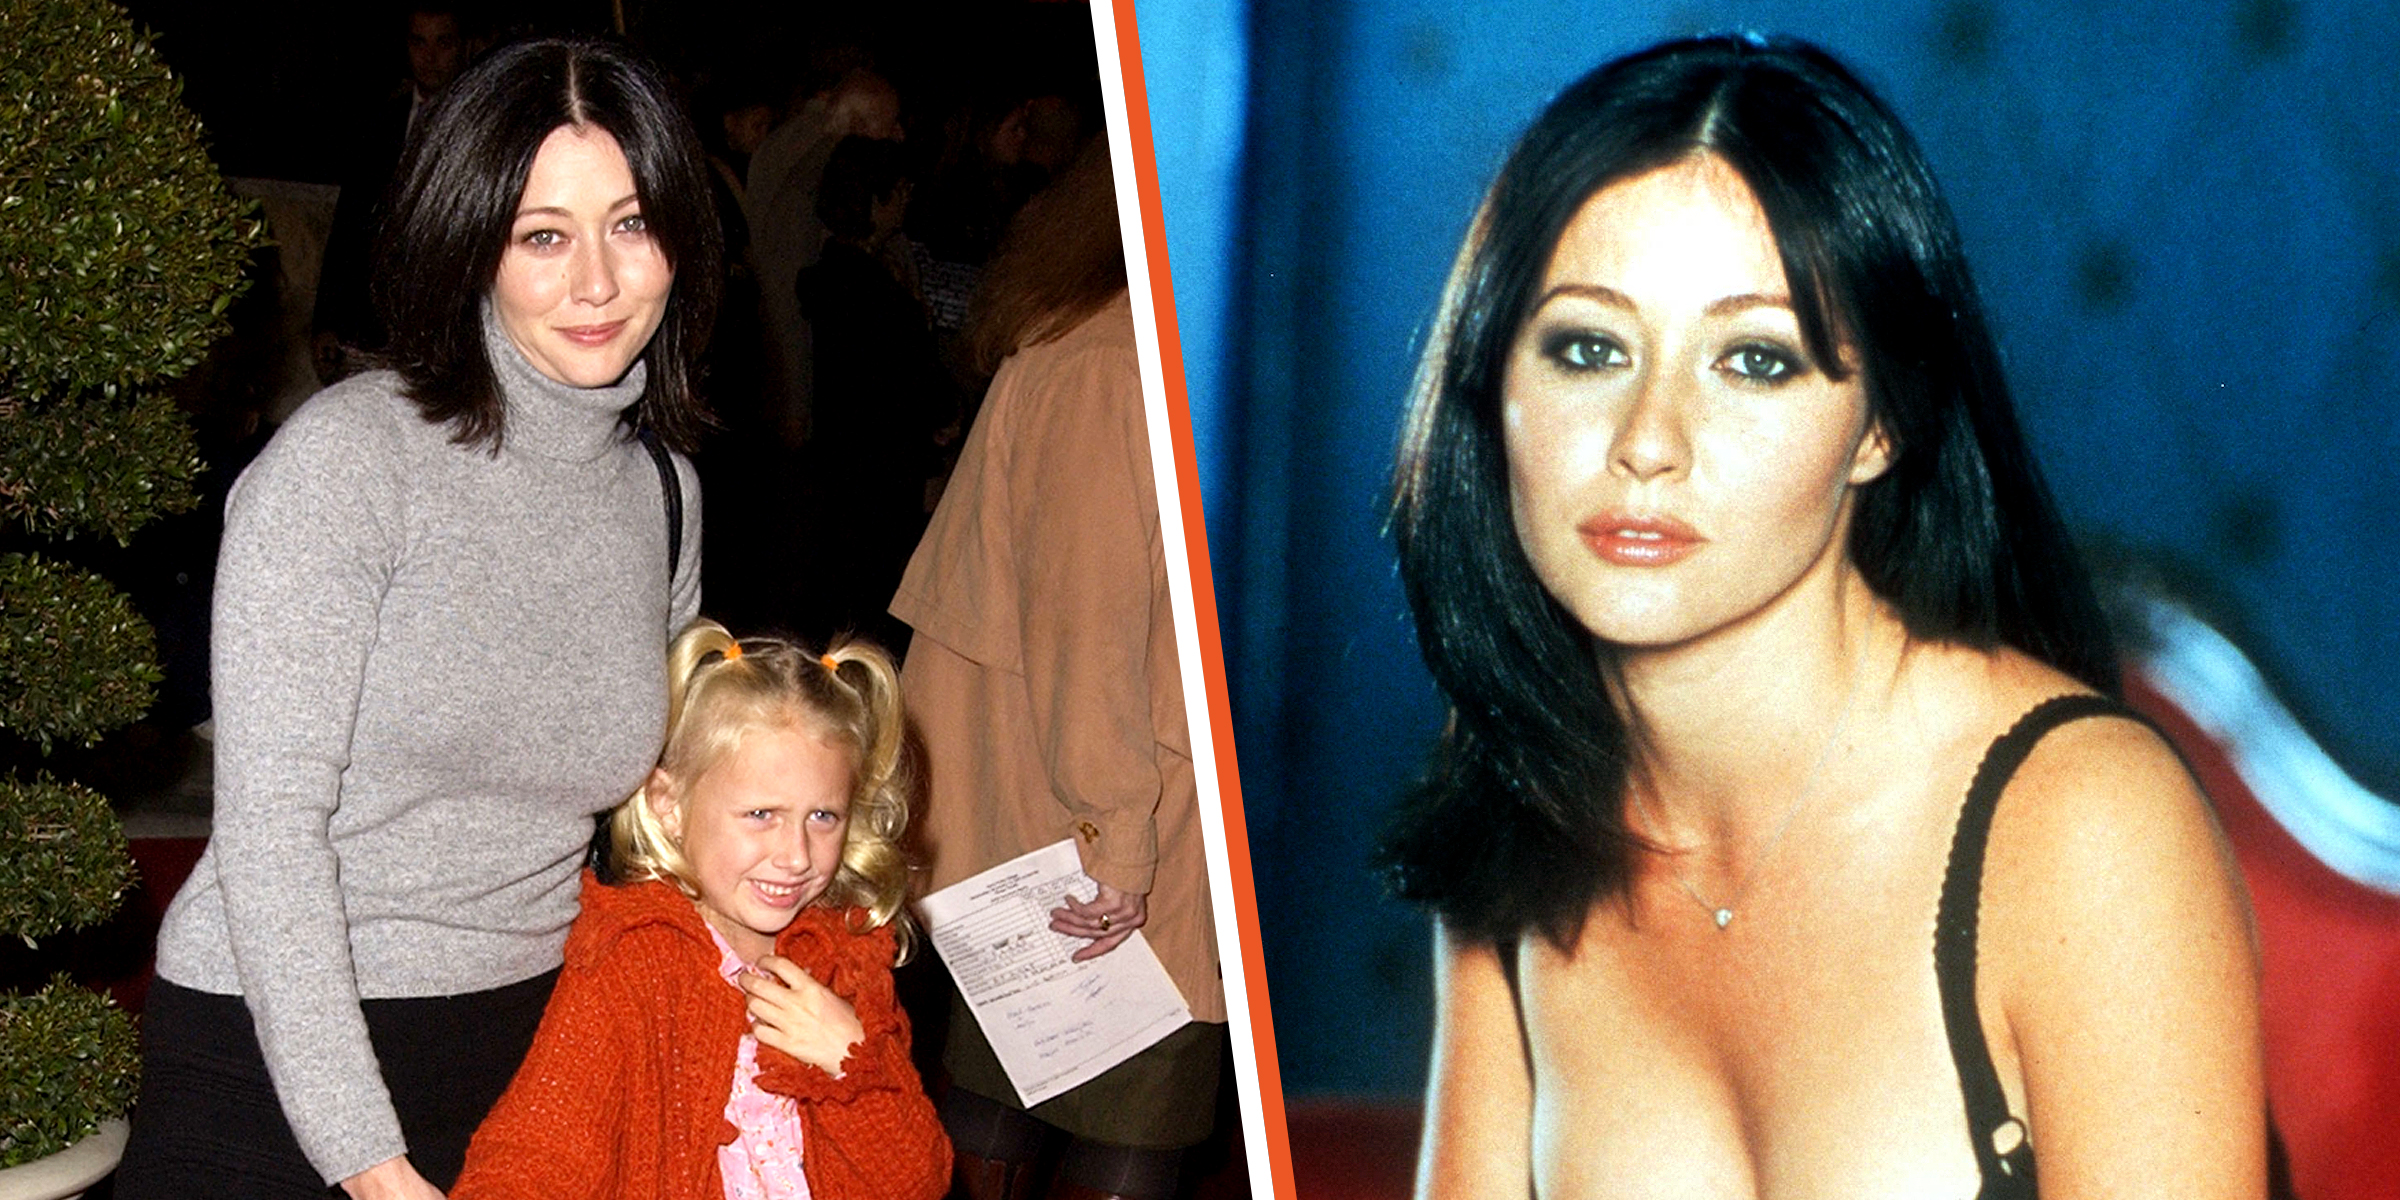 Shannen Doherty with a family member. | Source: Getty Images